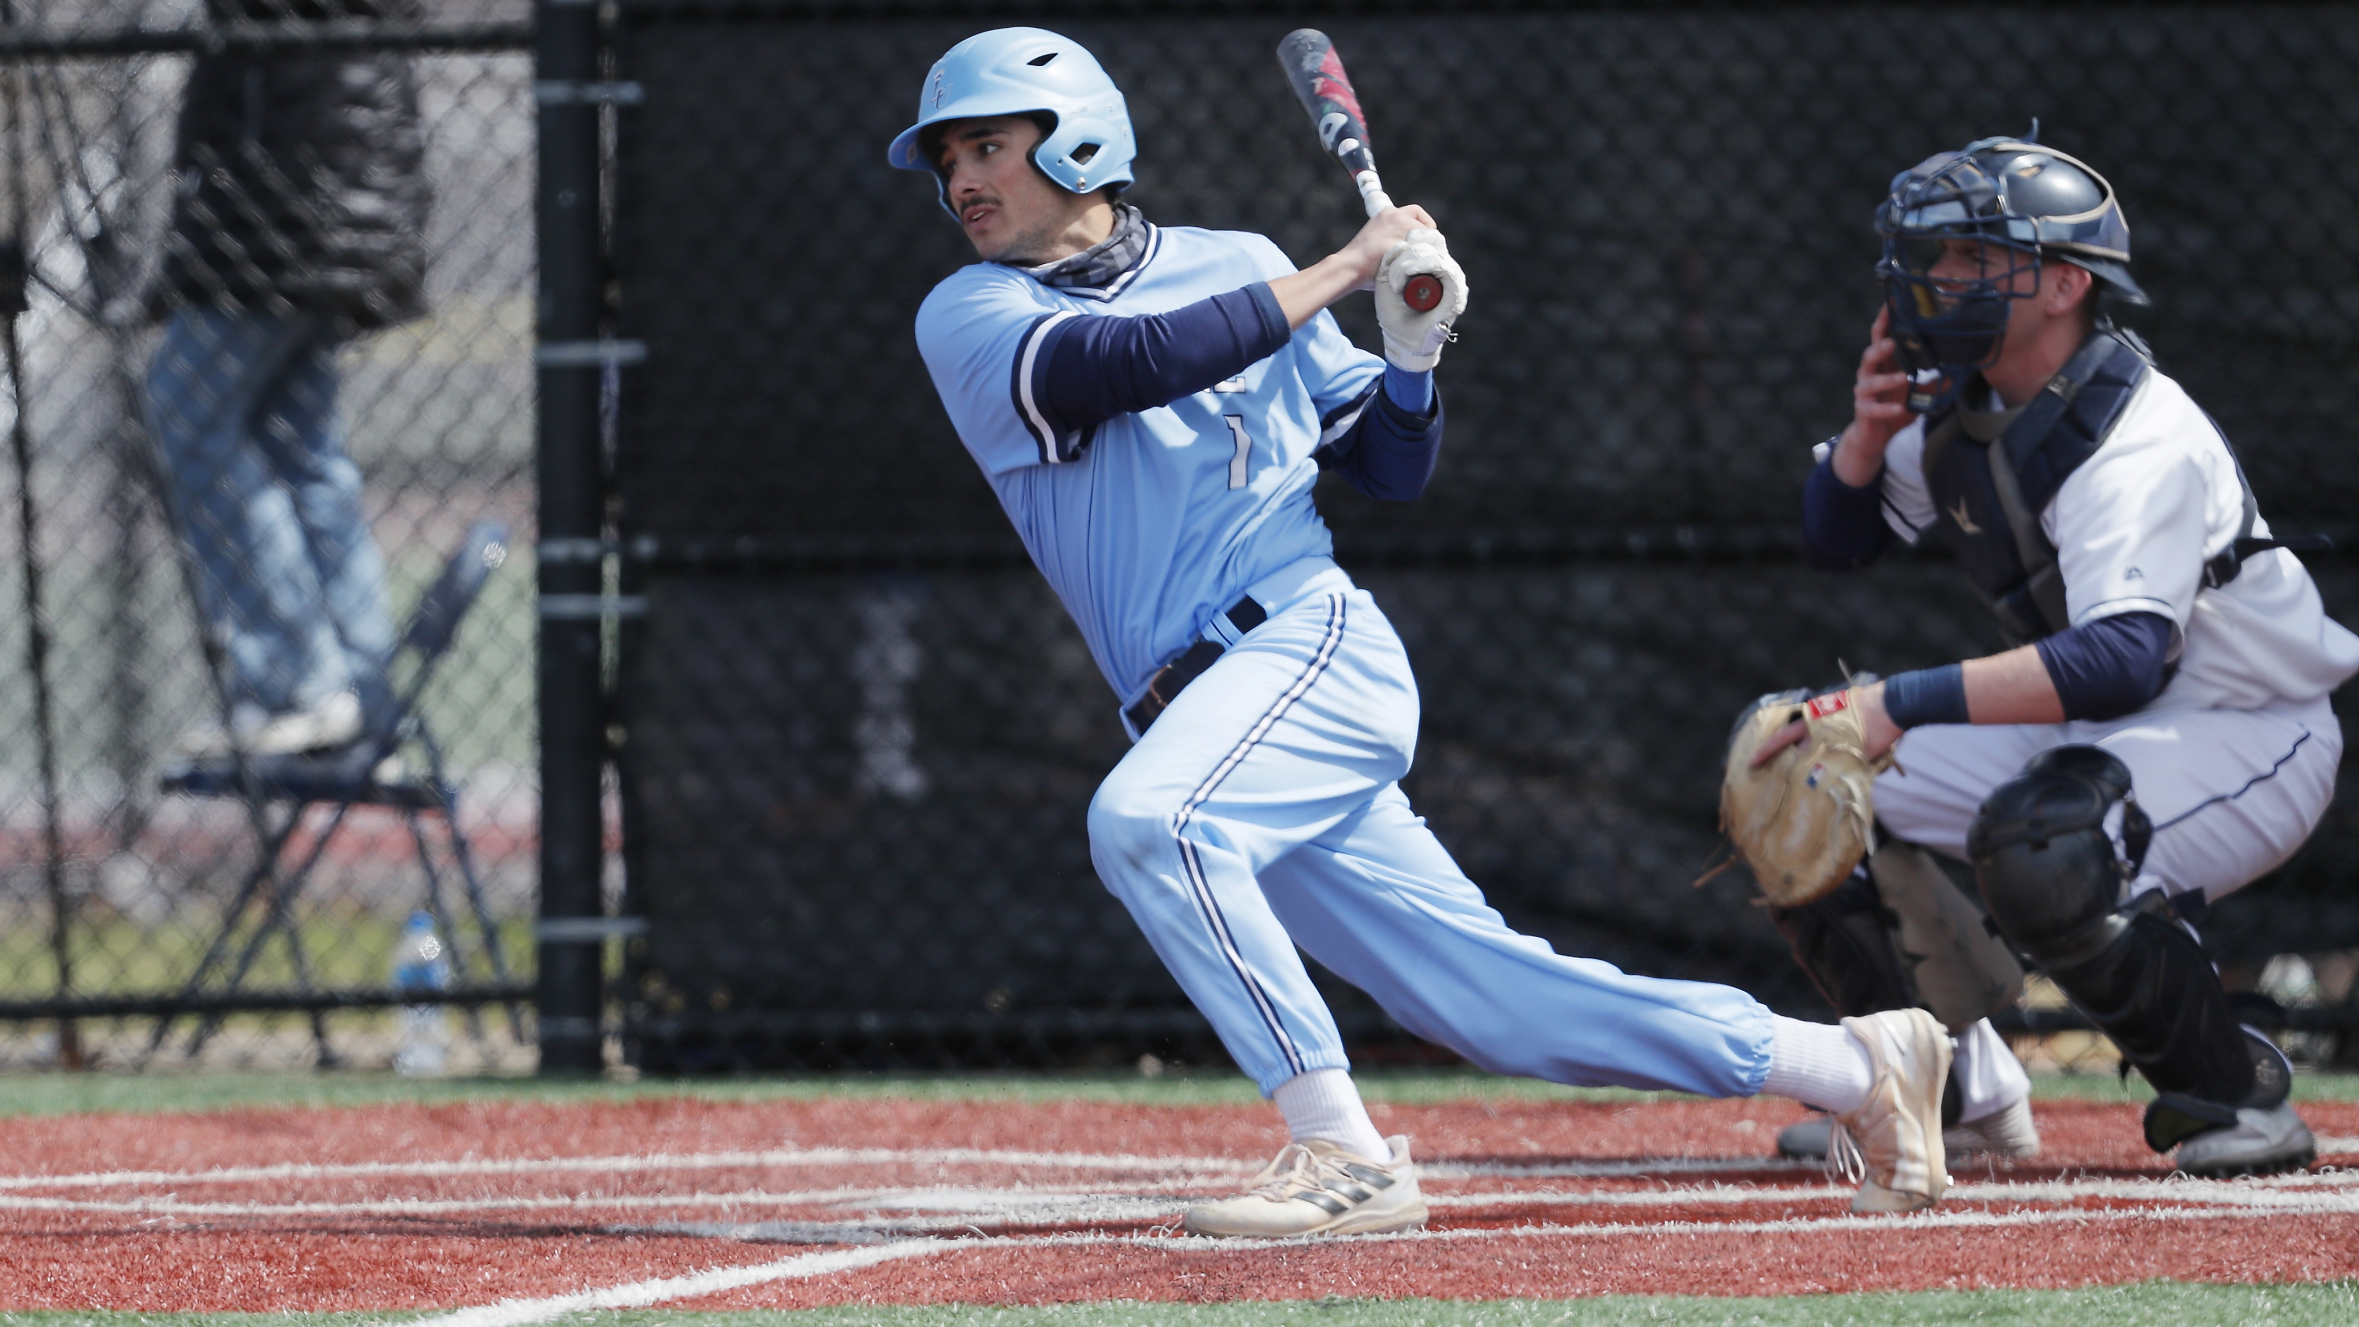 Baseball: Lasers move to 9-3 in GNAC as offense leads the way in Rivier sweep